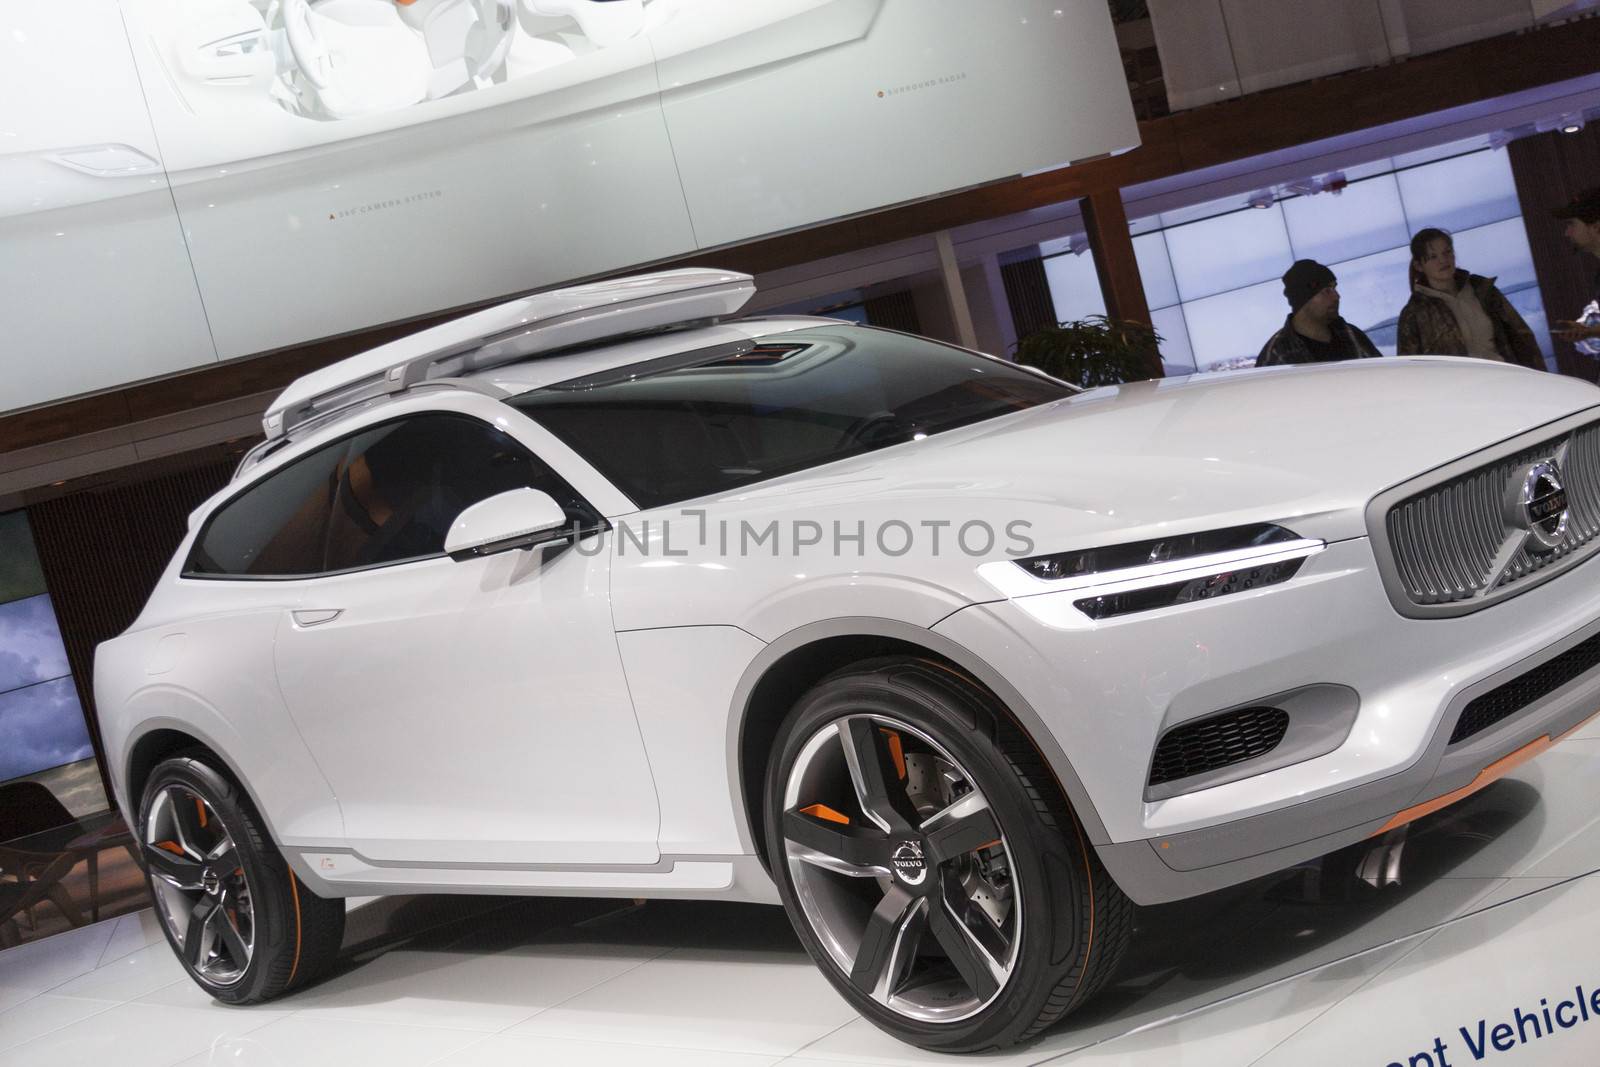 DETROIT - JANUARY 26 :The new 2015 Volvo Concept XC Coupe at The by snokid